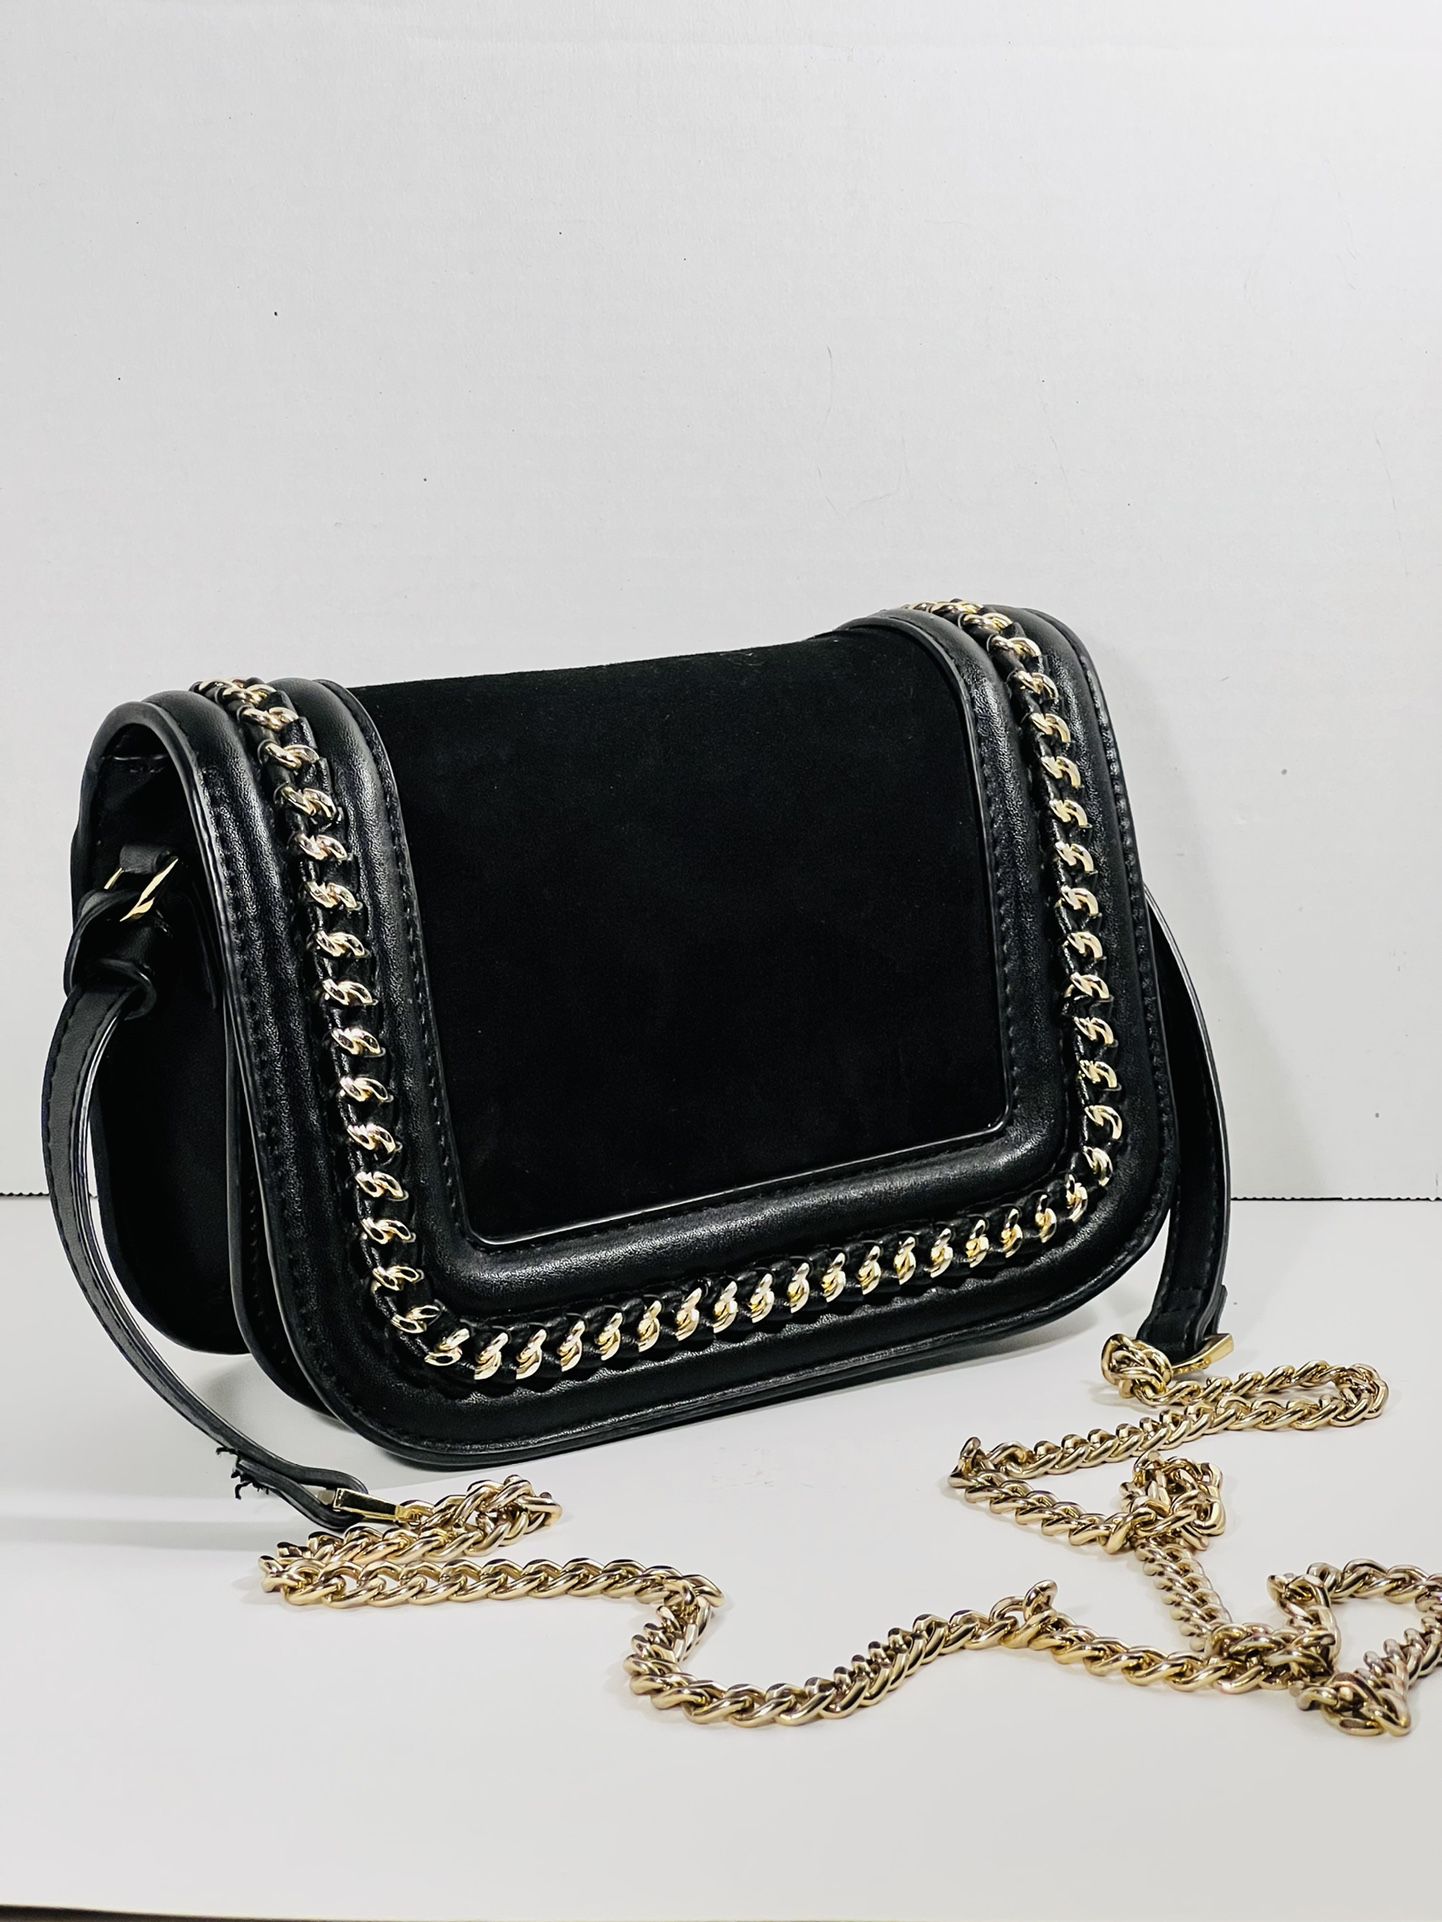 Beautiful suede and faux leather crossbody purse with gold chain